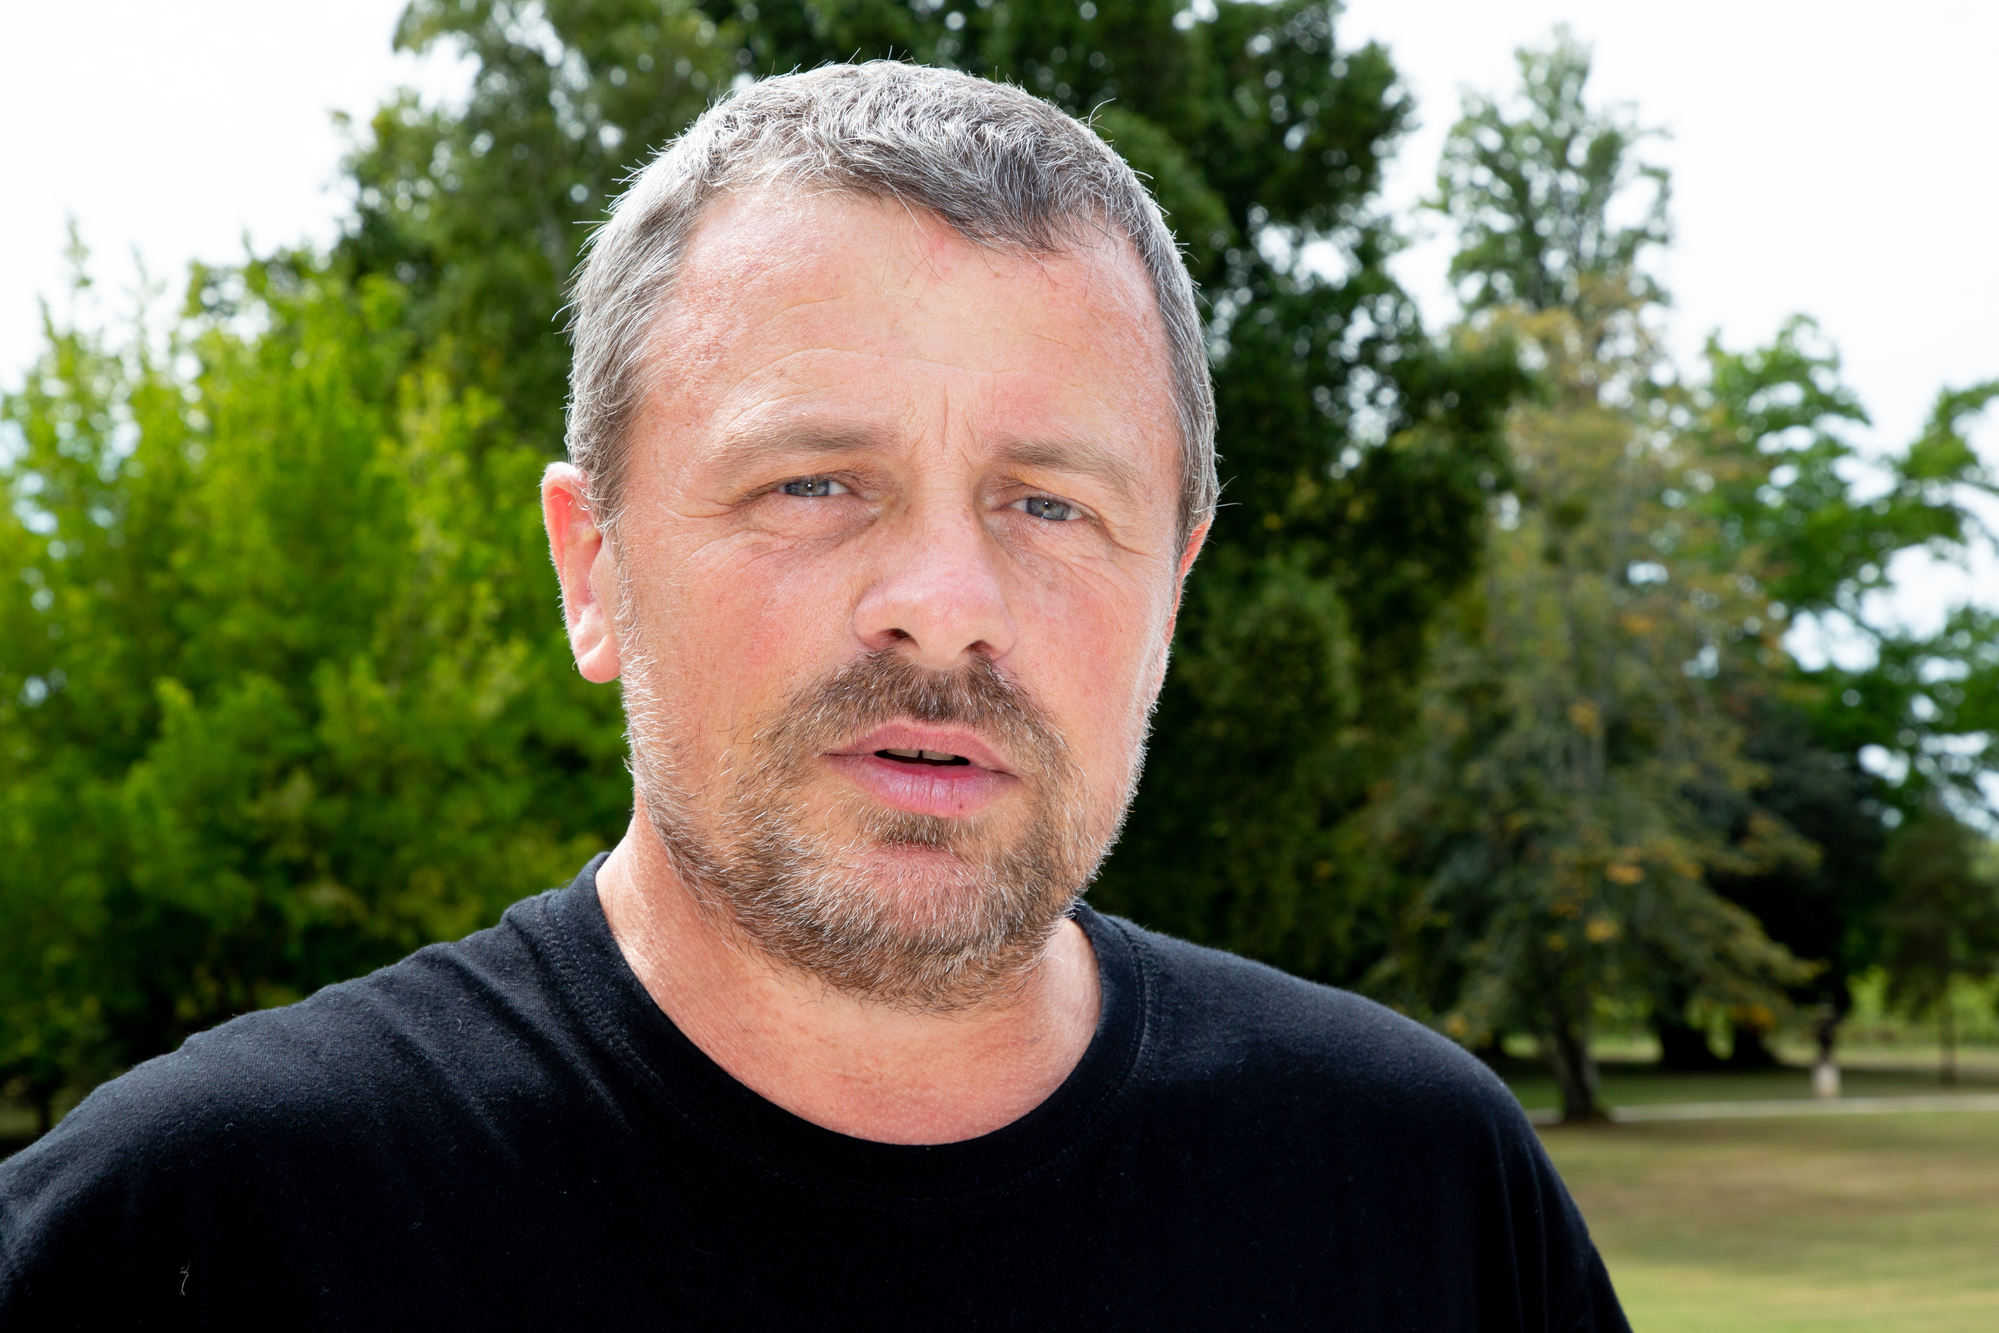 A man with short gray hair and a beard is standing outdoors. He is wearing a black t-shirt and looking directly at the camera with a neutral expression. The background features lush green trees and a bright sky.